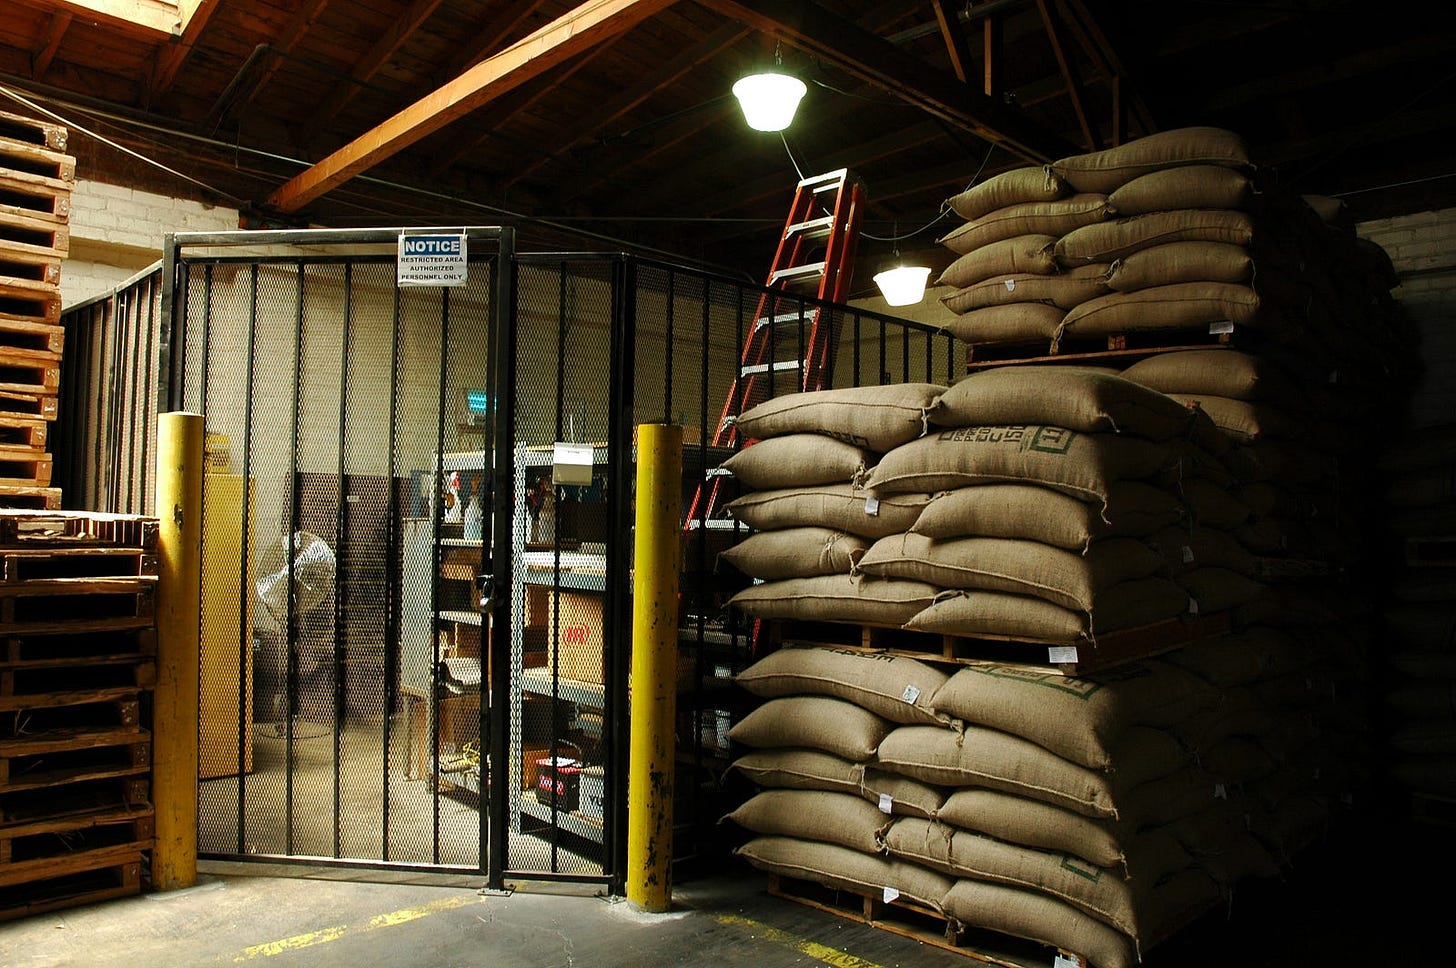 Photo of the darkish inside of a warehouse, showing multiple sacks of something or other stacked up on palettes on the right. There is a stack of empty palettes on the left reaching almost to the ceiling.